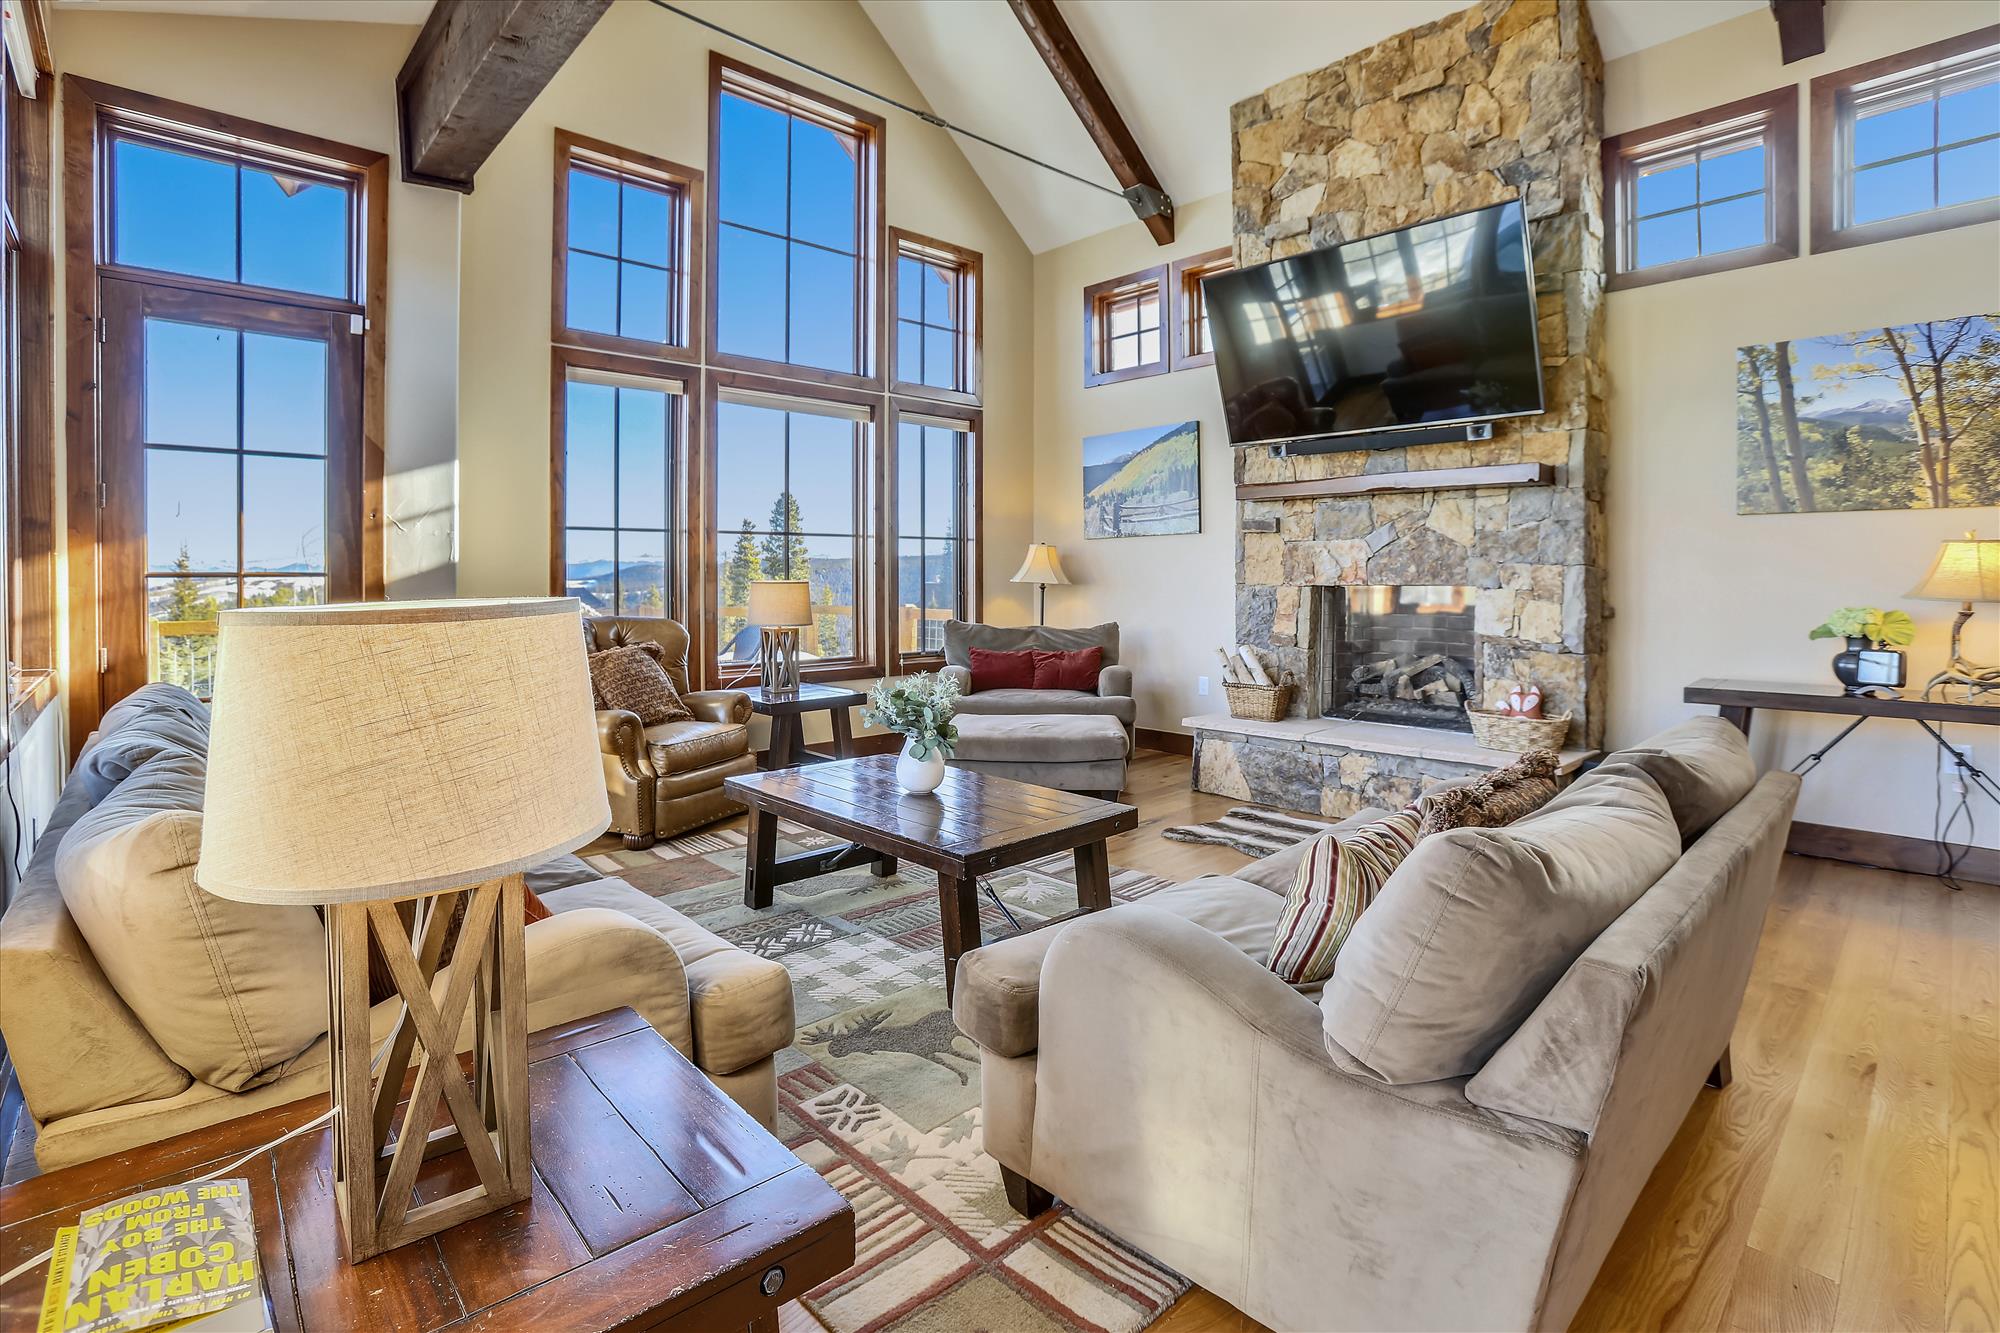 Your group can take in the mountain views or a show in this cozy living room